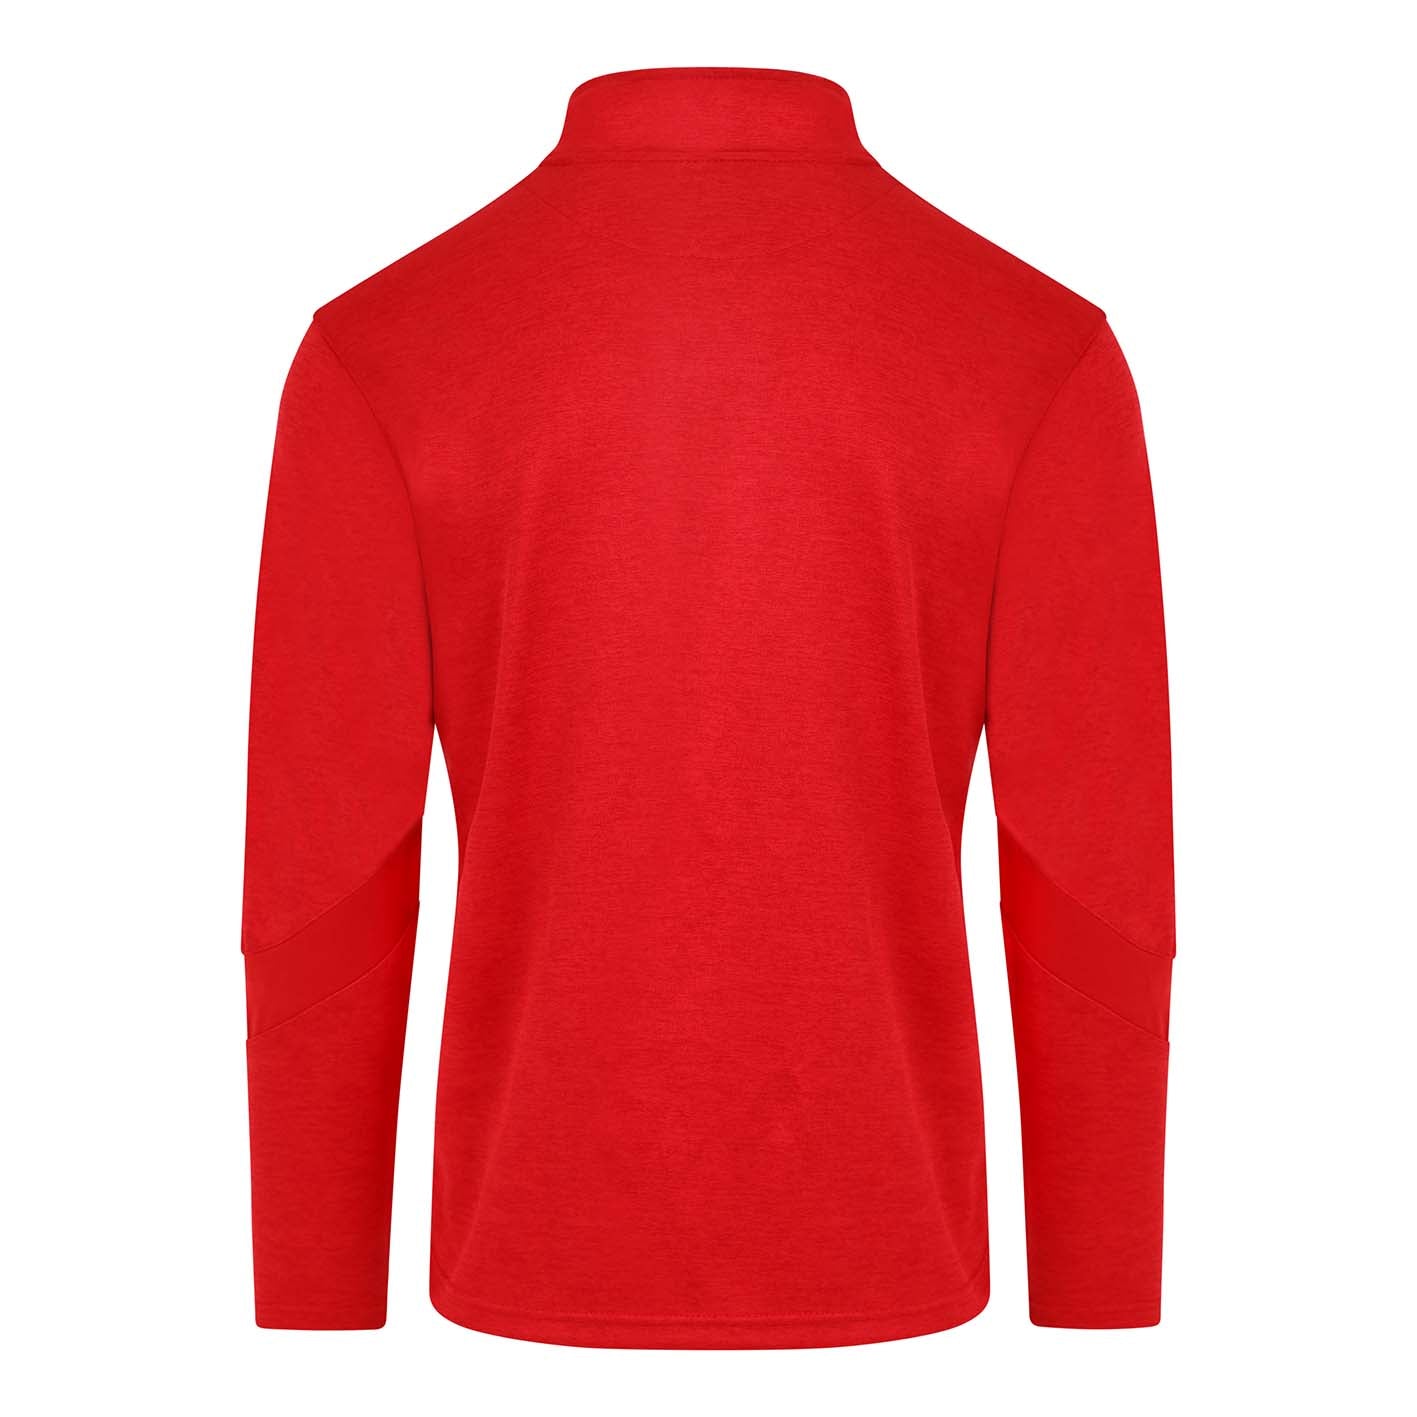 Mc Keever OMP United Core 22 1/4 Zip Top - Youth - Red